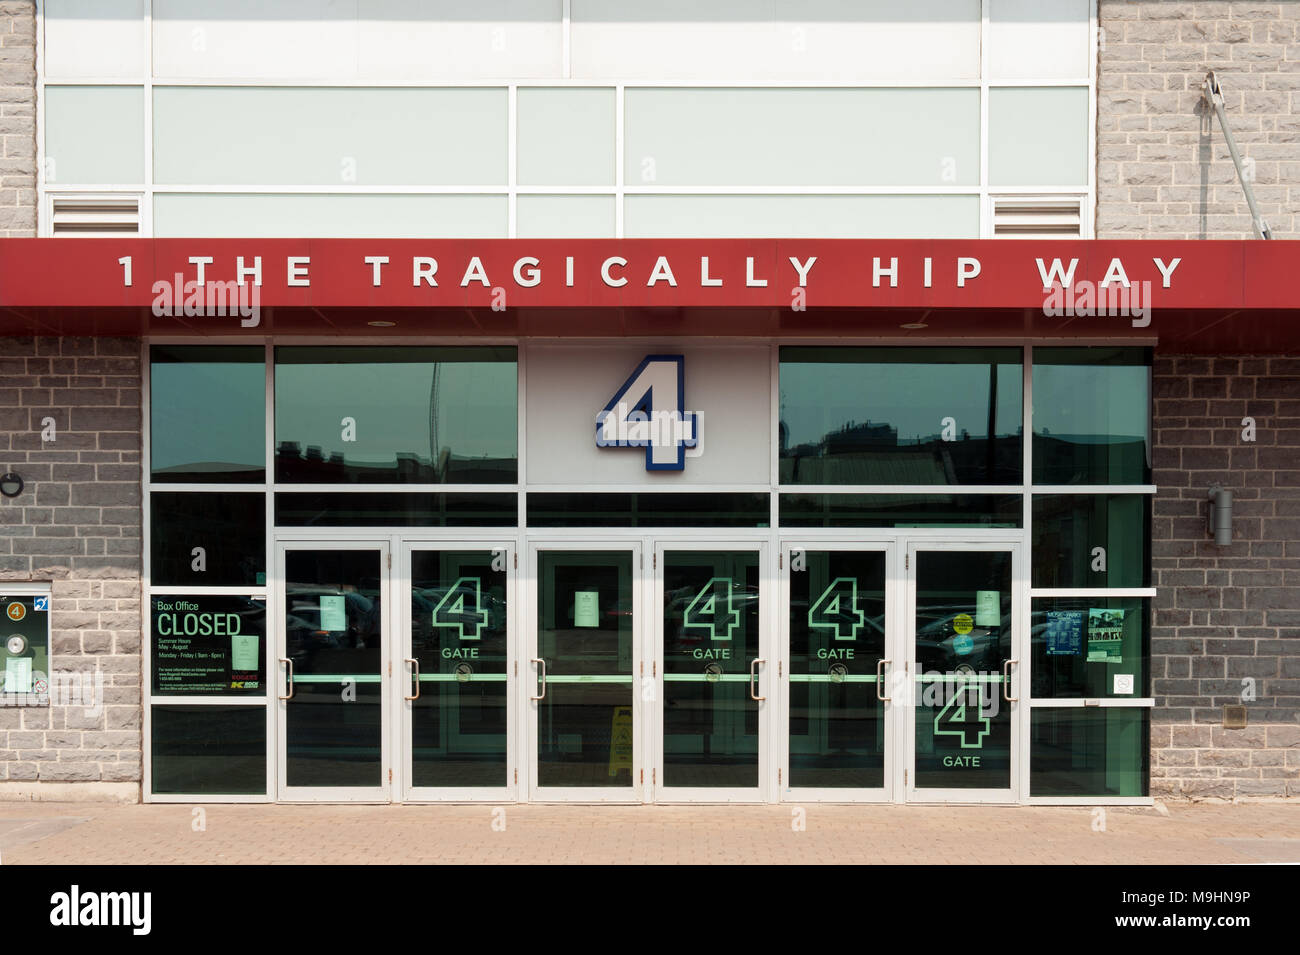 Gate 4 of Rogers K-Rock Centre, situated on the Tragically Hip Way, Kingston, Ontario. Stock Photo